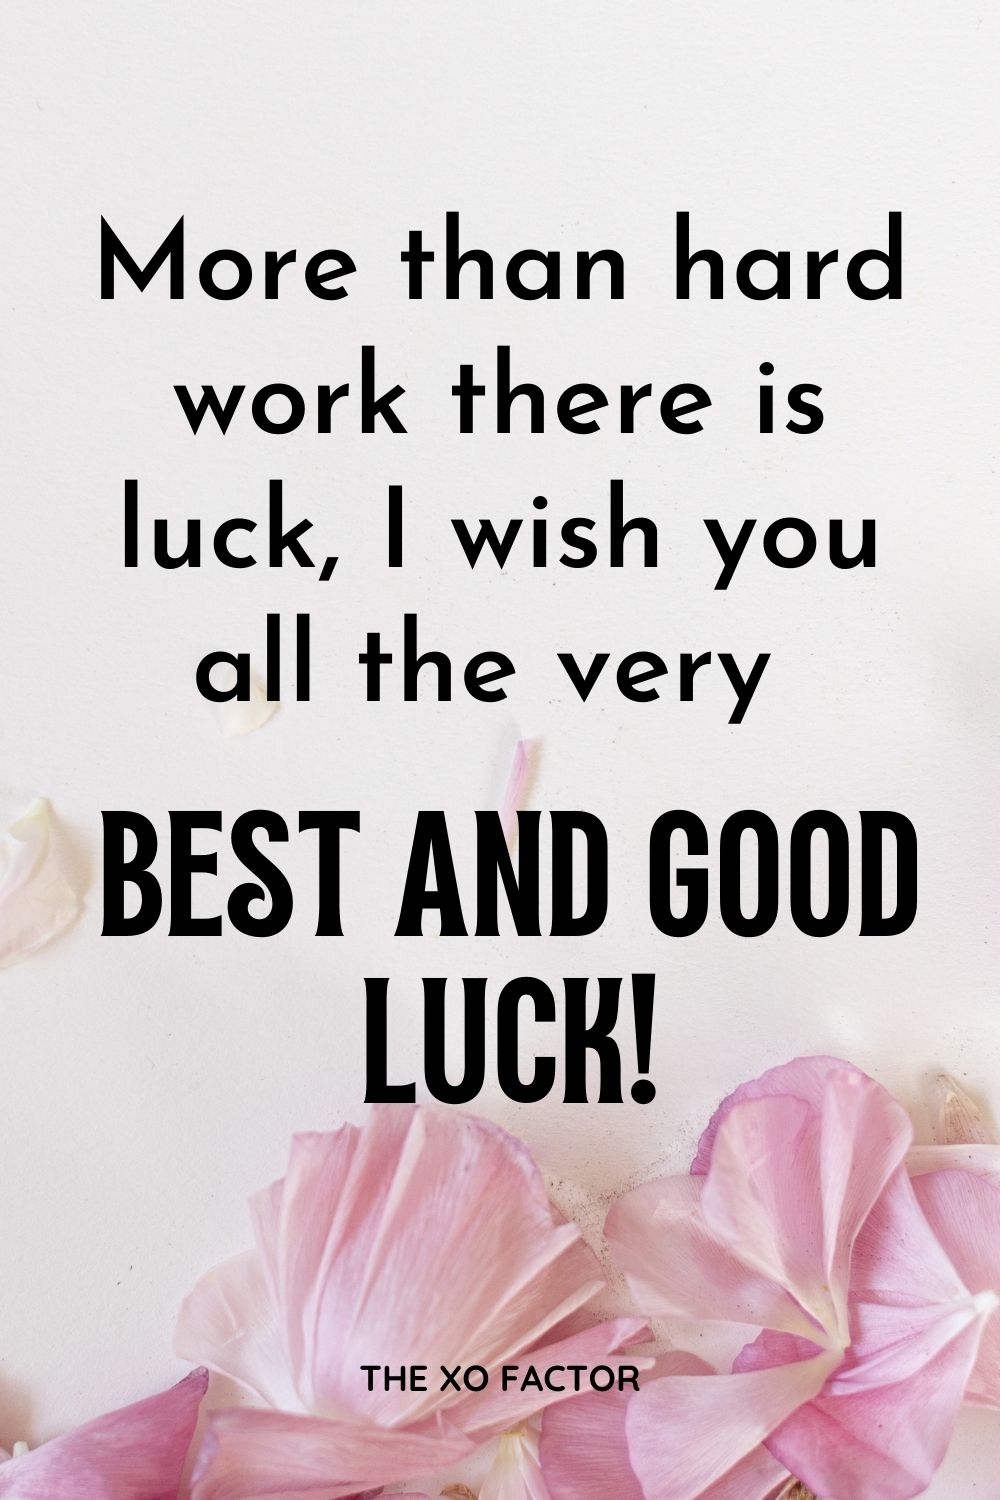 More than hard work there is luck, I wish you all the very best and good luck!